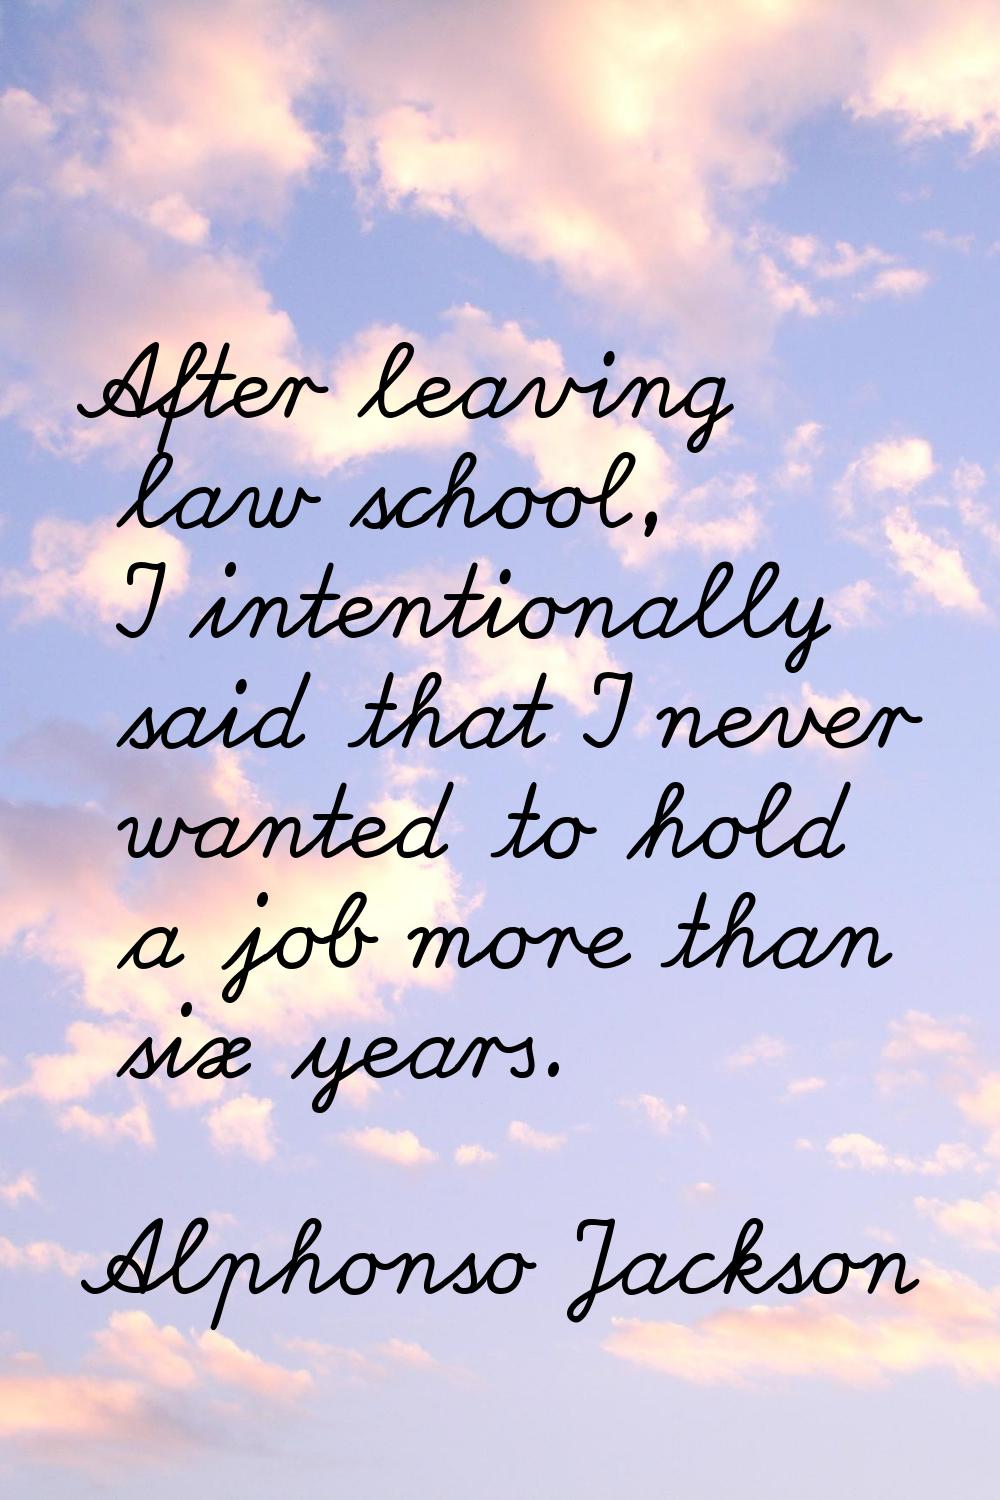 After leaving law school, I intentionally said that I never wanted to hold a job more than six year